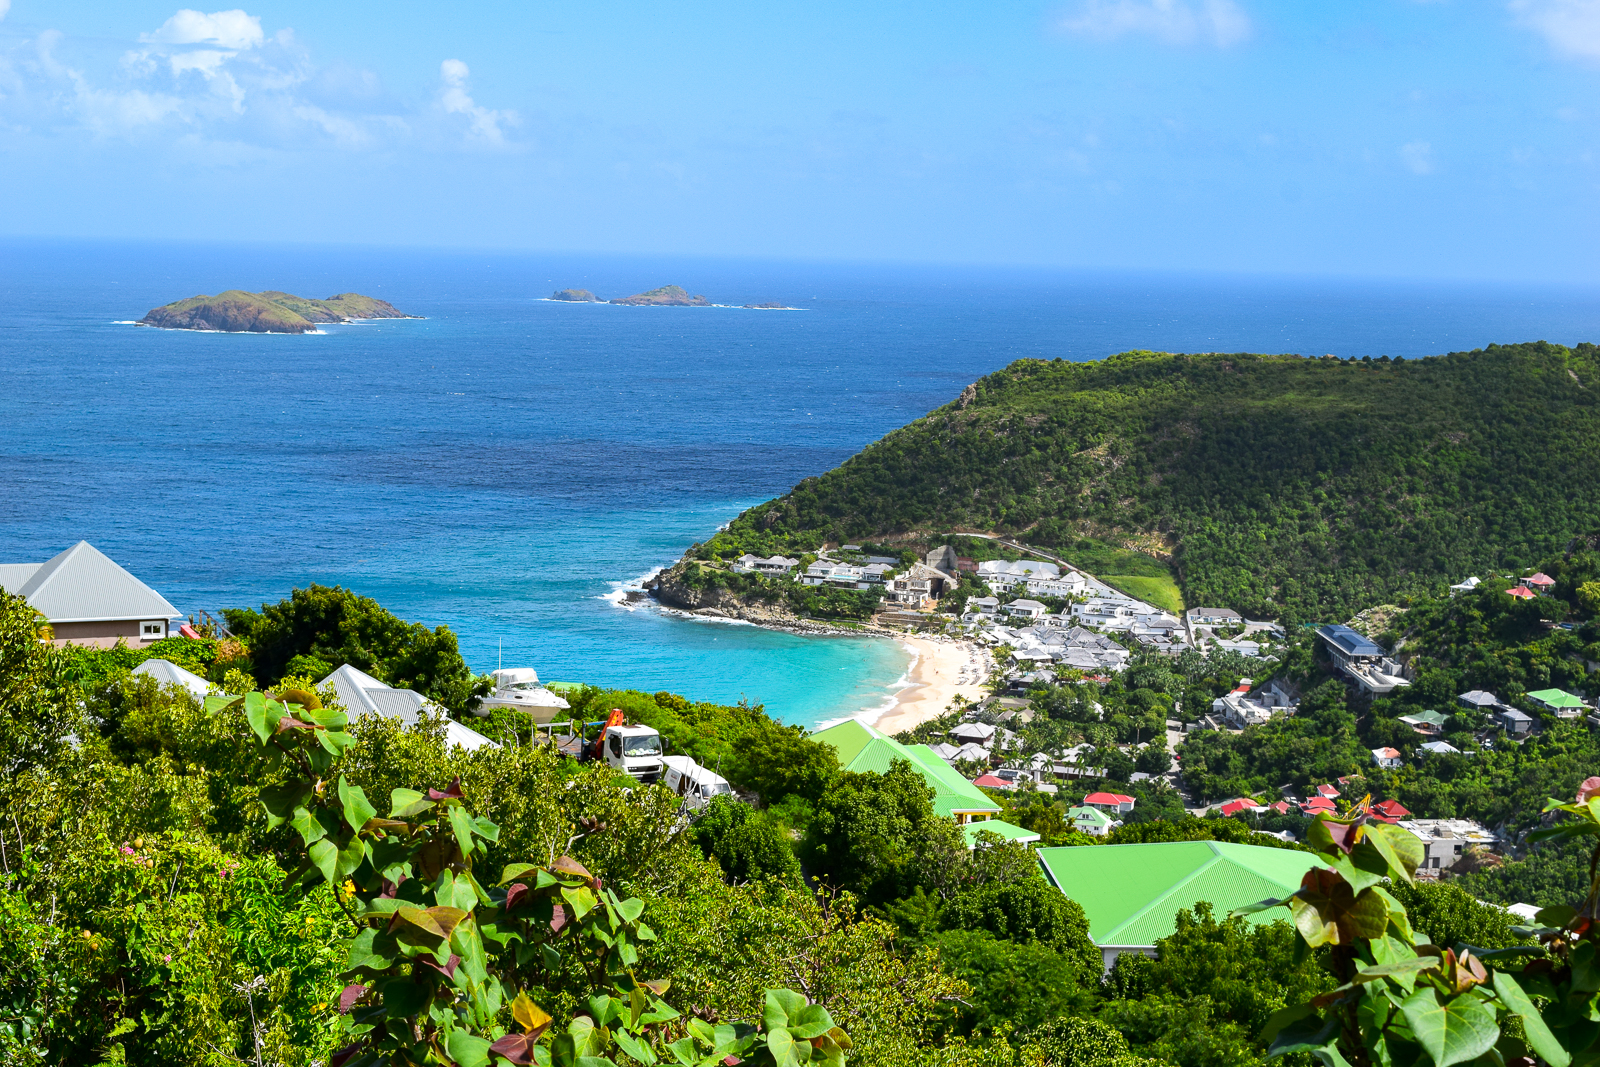 The Best Beaches of St. Barths